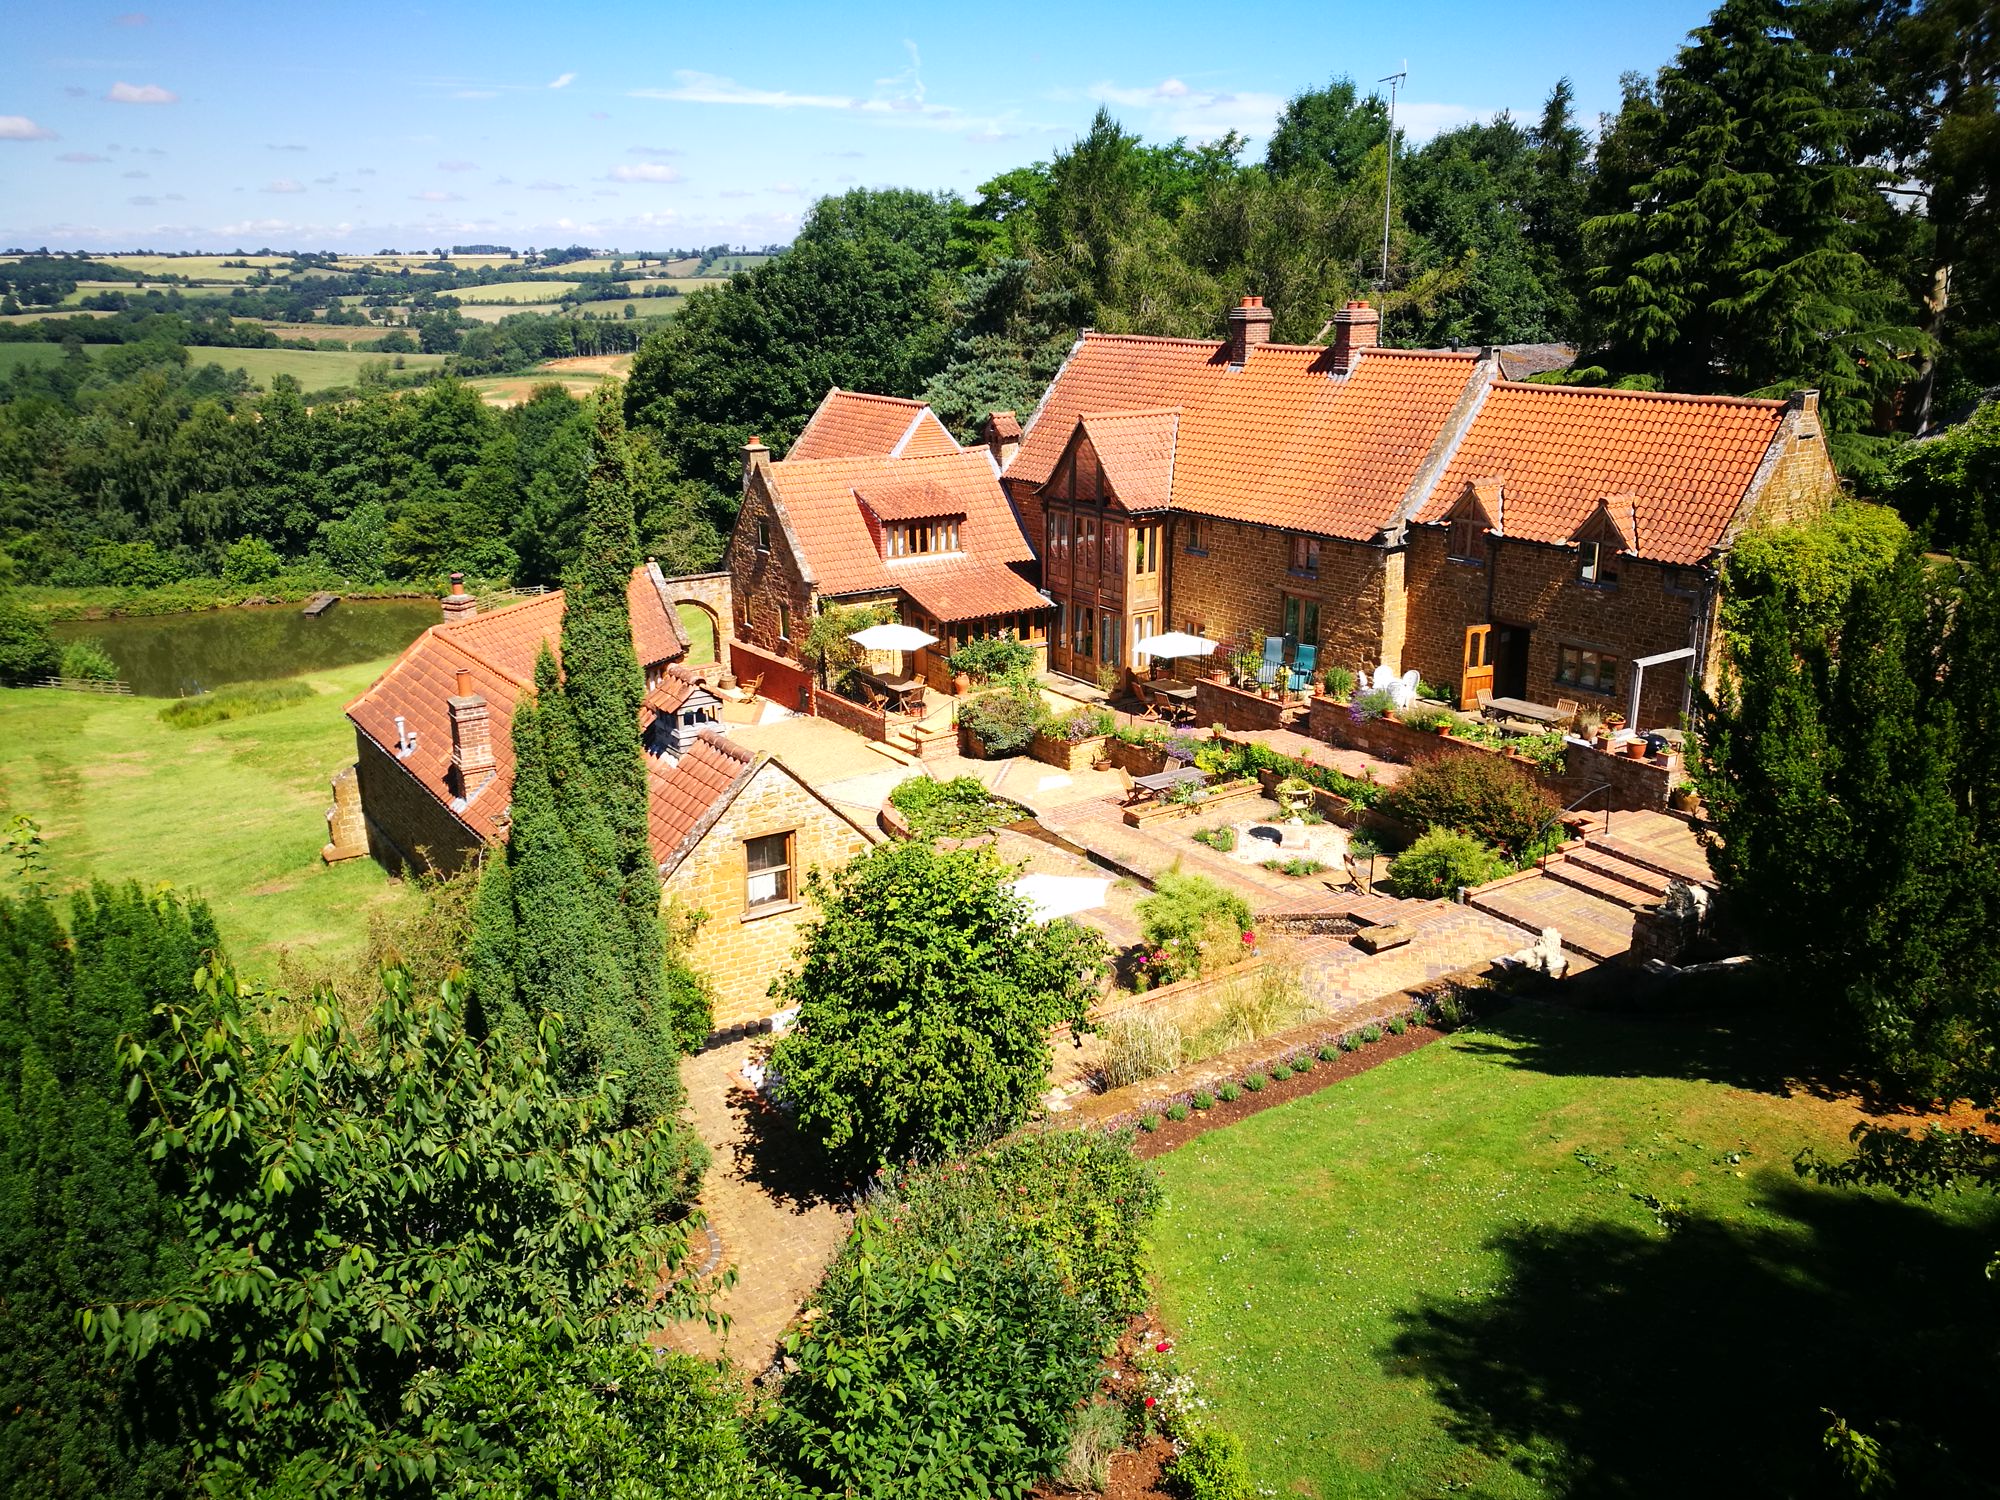 Self-Catering in UK holidays at Cool Places